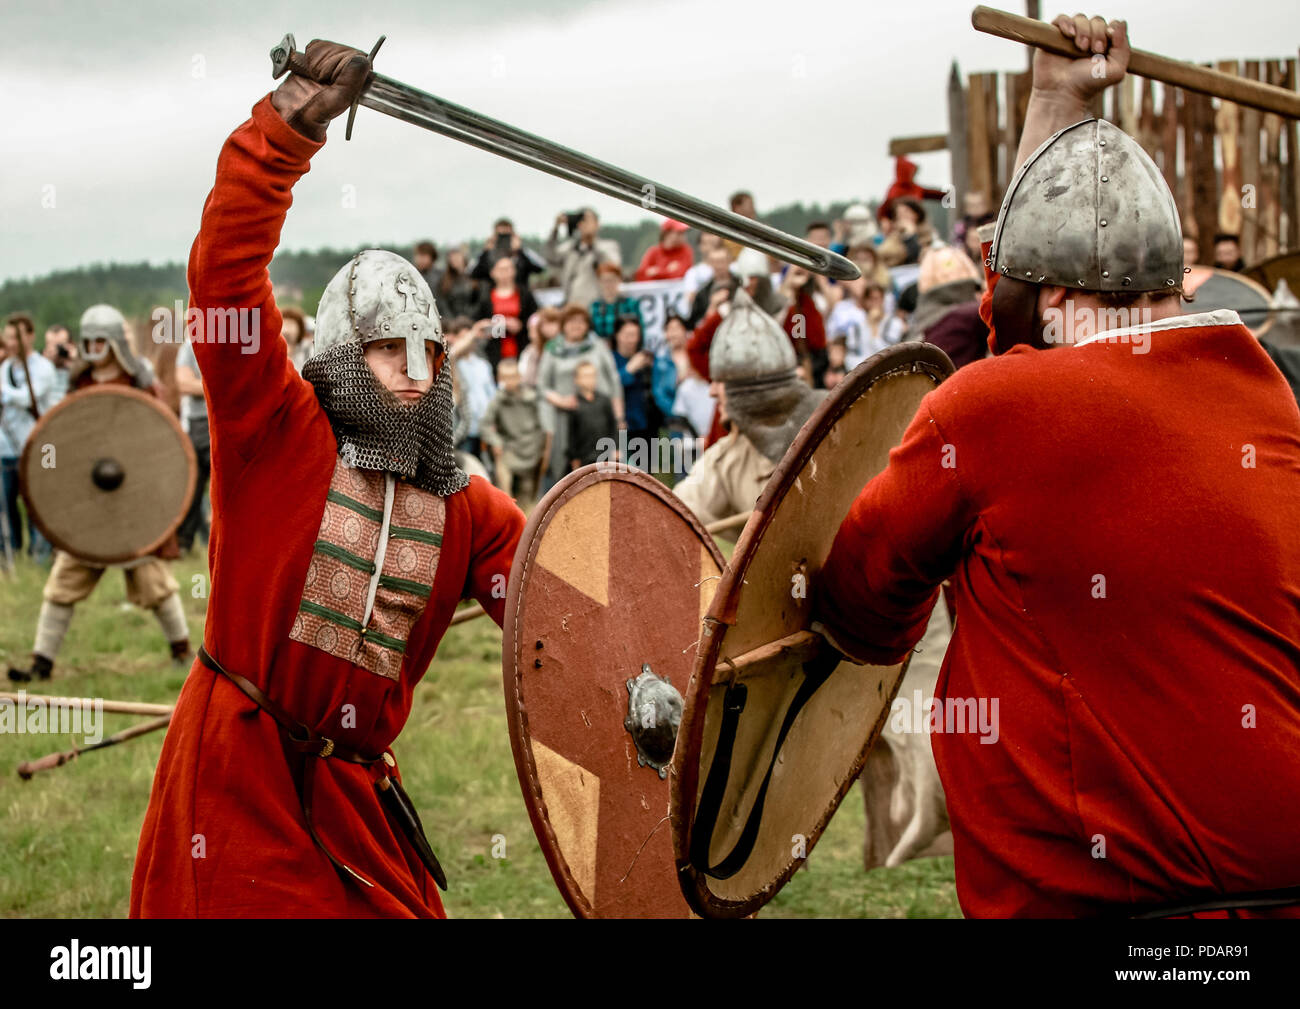 07.22.2017 Russia, Bryansk. Festival for lovers of historical military reconstruction. People dressed in clothes of Vikings and Russian heroes armed with cold weapons are divided into two groups fighting each other. Stock Photo